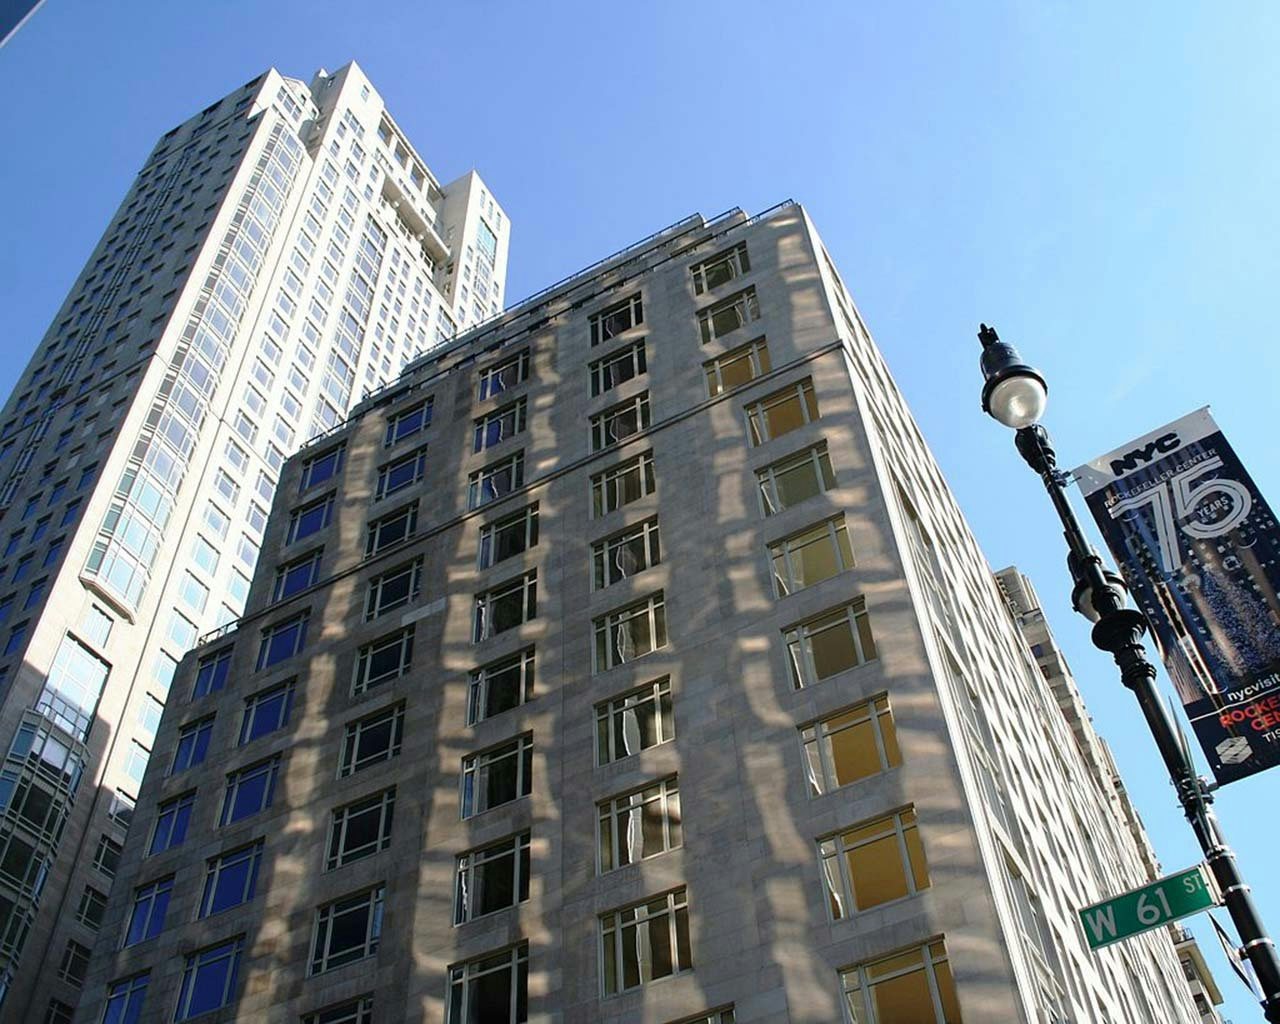 15 Central Park West. Image via Wikimedia Commons.